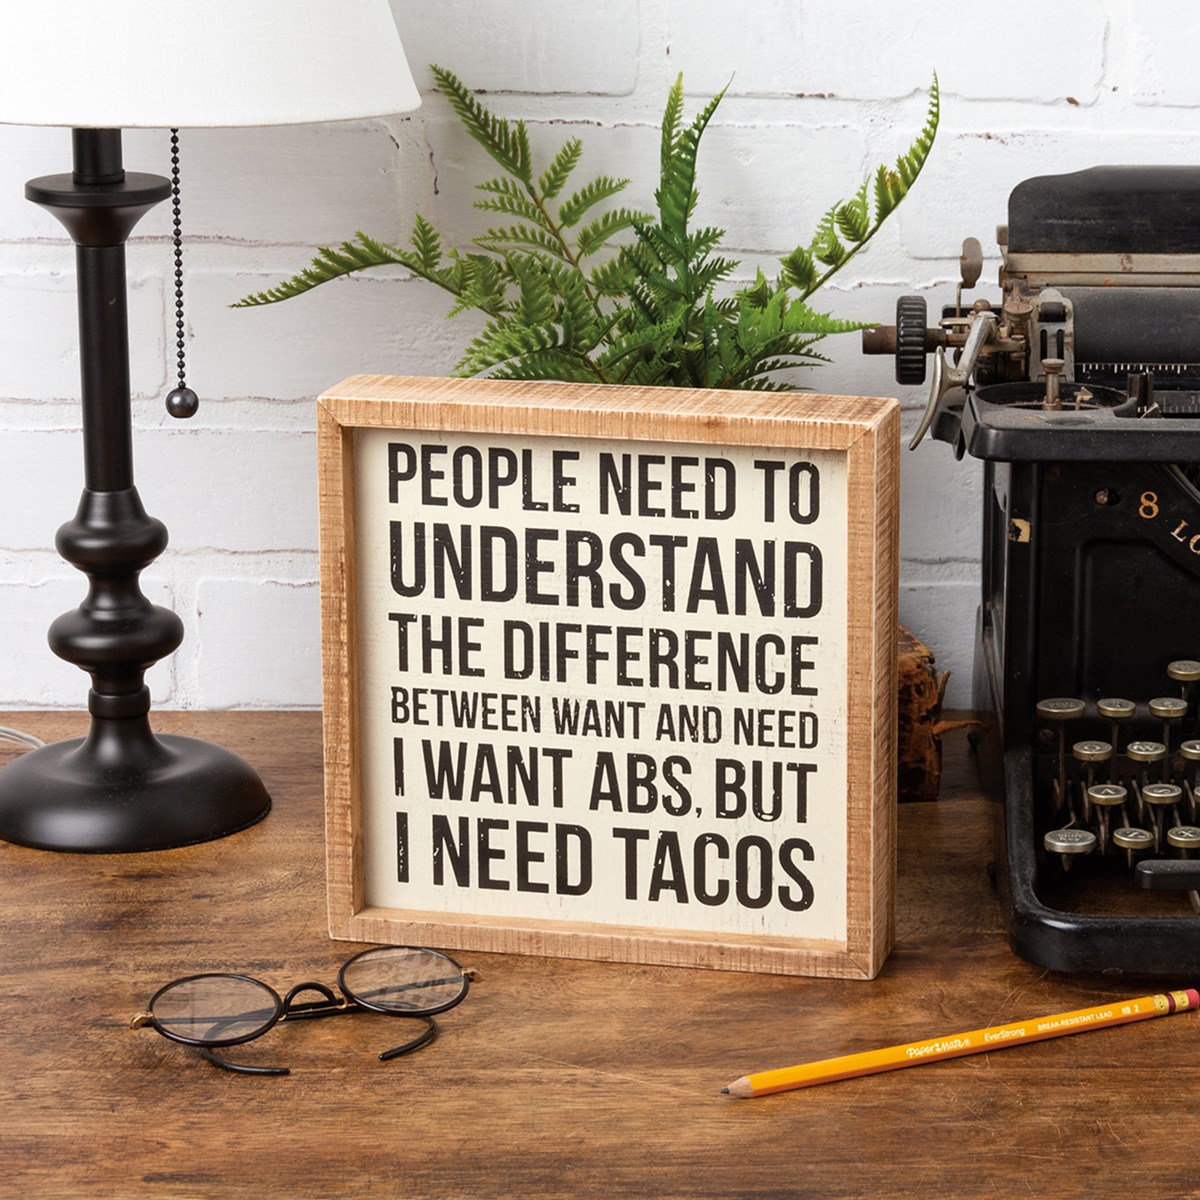 I Want Abs But I Need Tacos Inset Box Sign - Wood